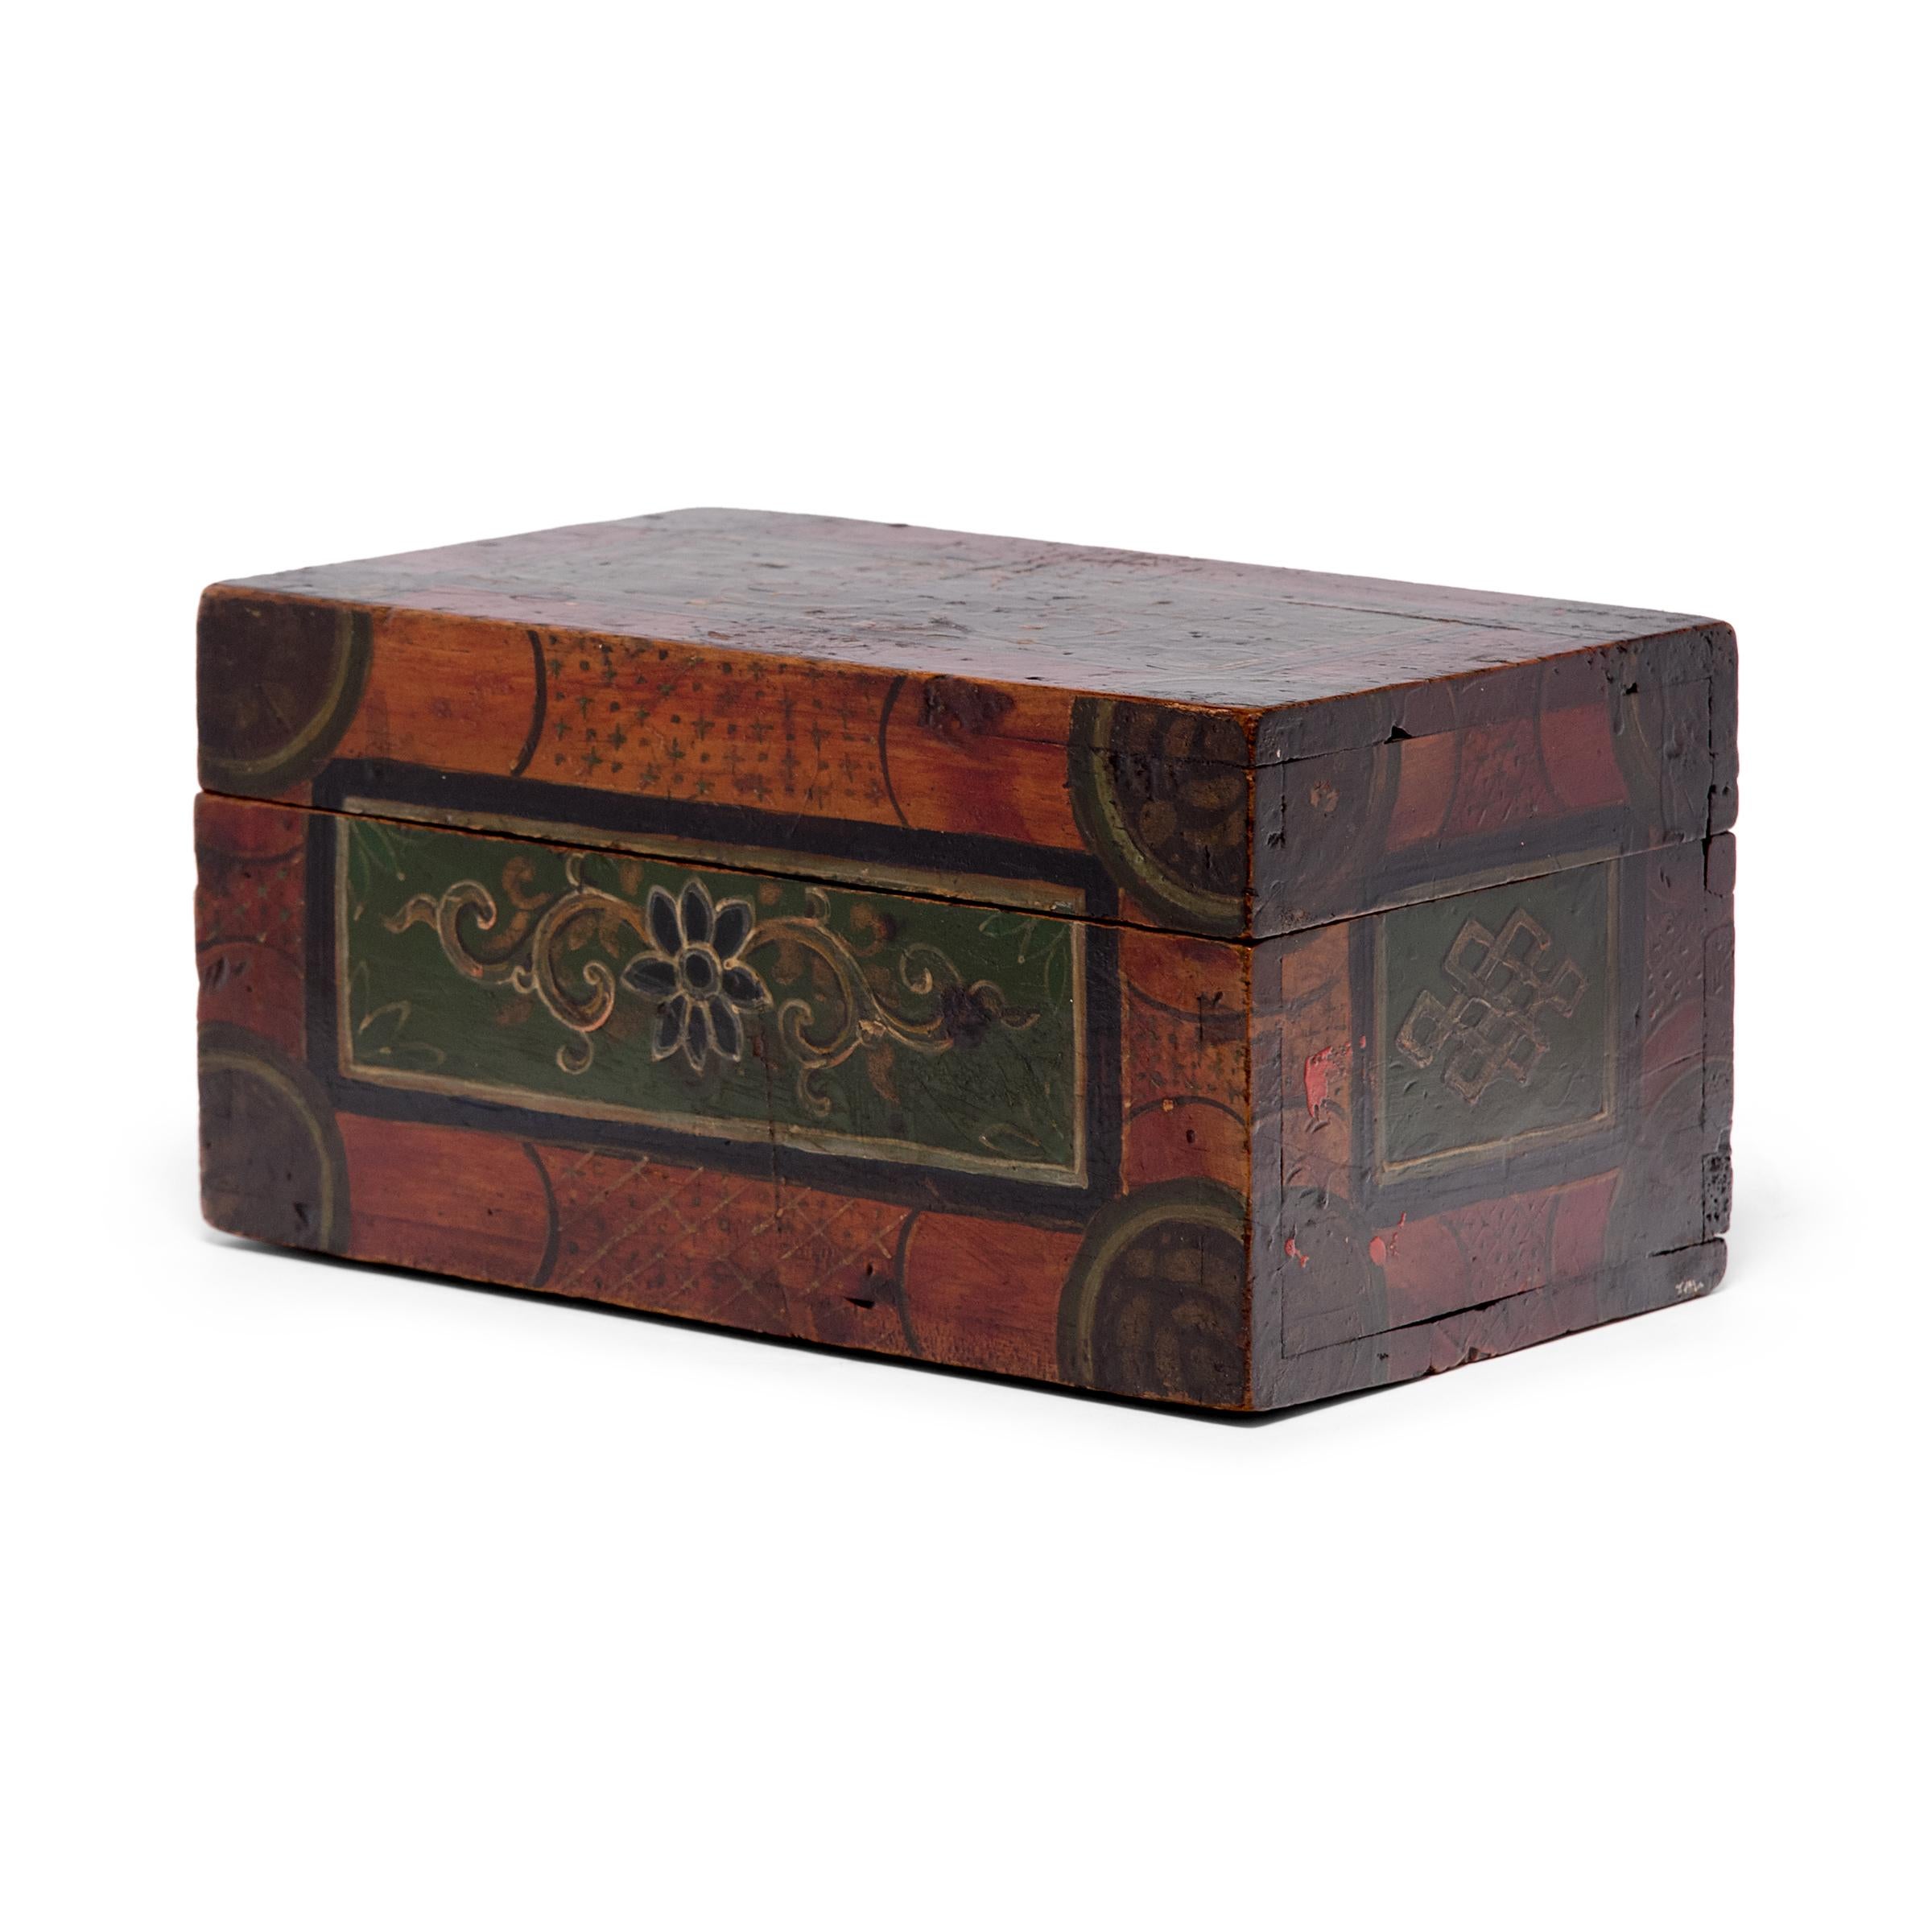 This vintage box dates to the early 20th century and is decorated in the style of Mongolian and Tibetan furniture. The exterior is painted with chrysanthemum blossoms and endless knots, Buddhist symbols of endless wisdom and compassion. Painted in a